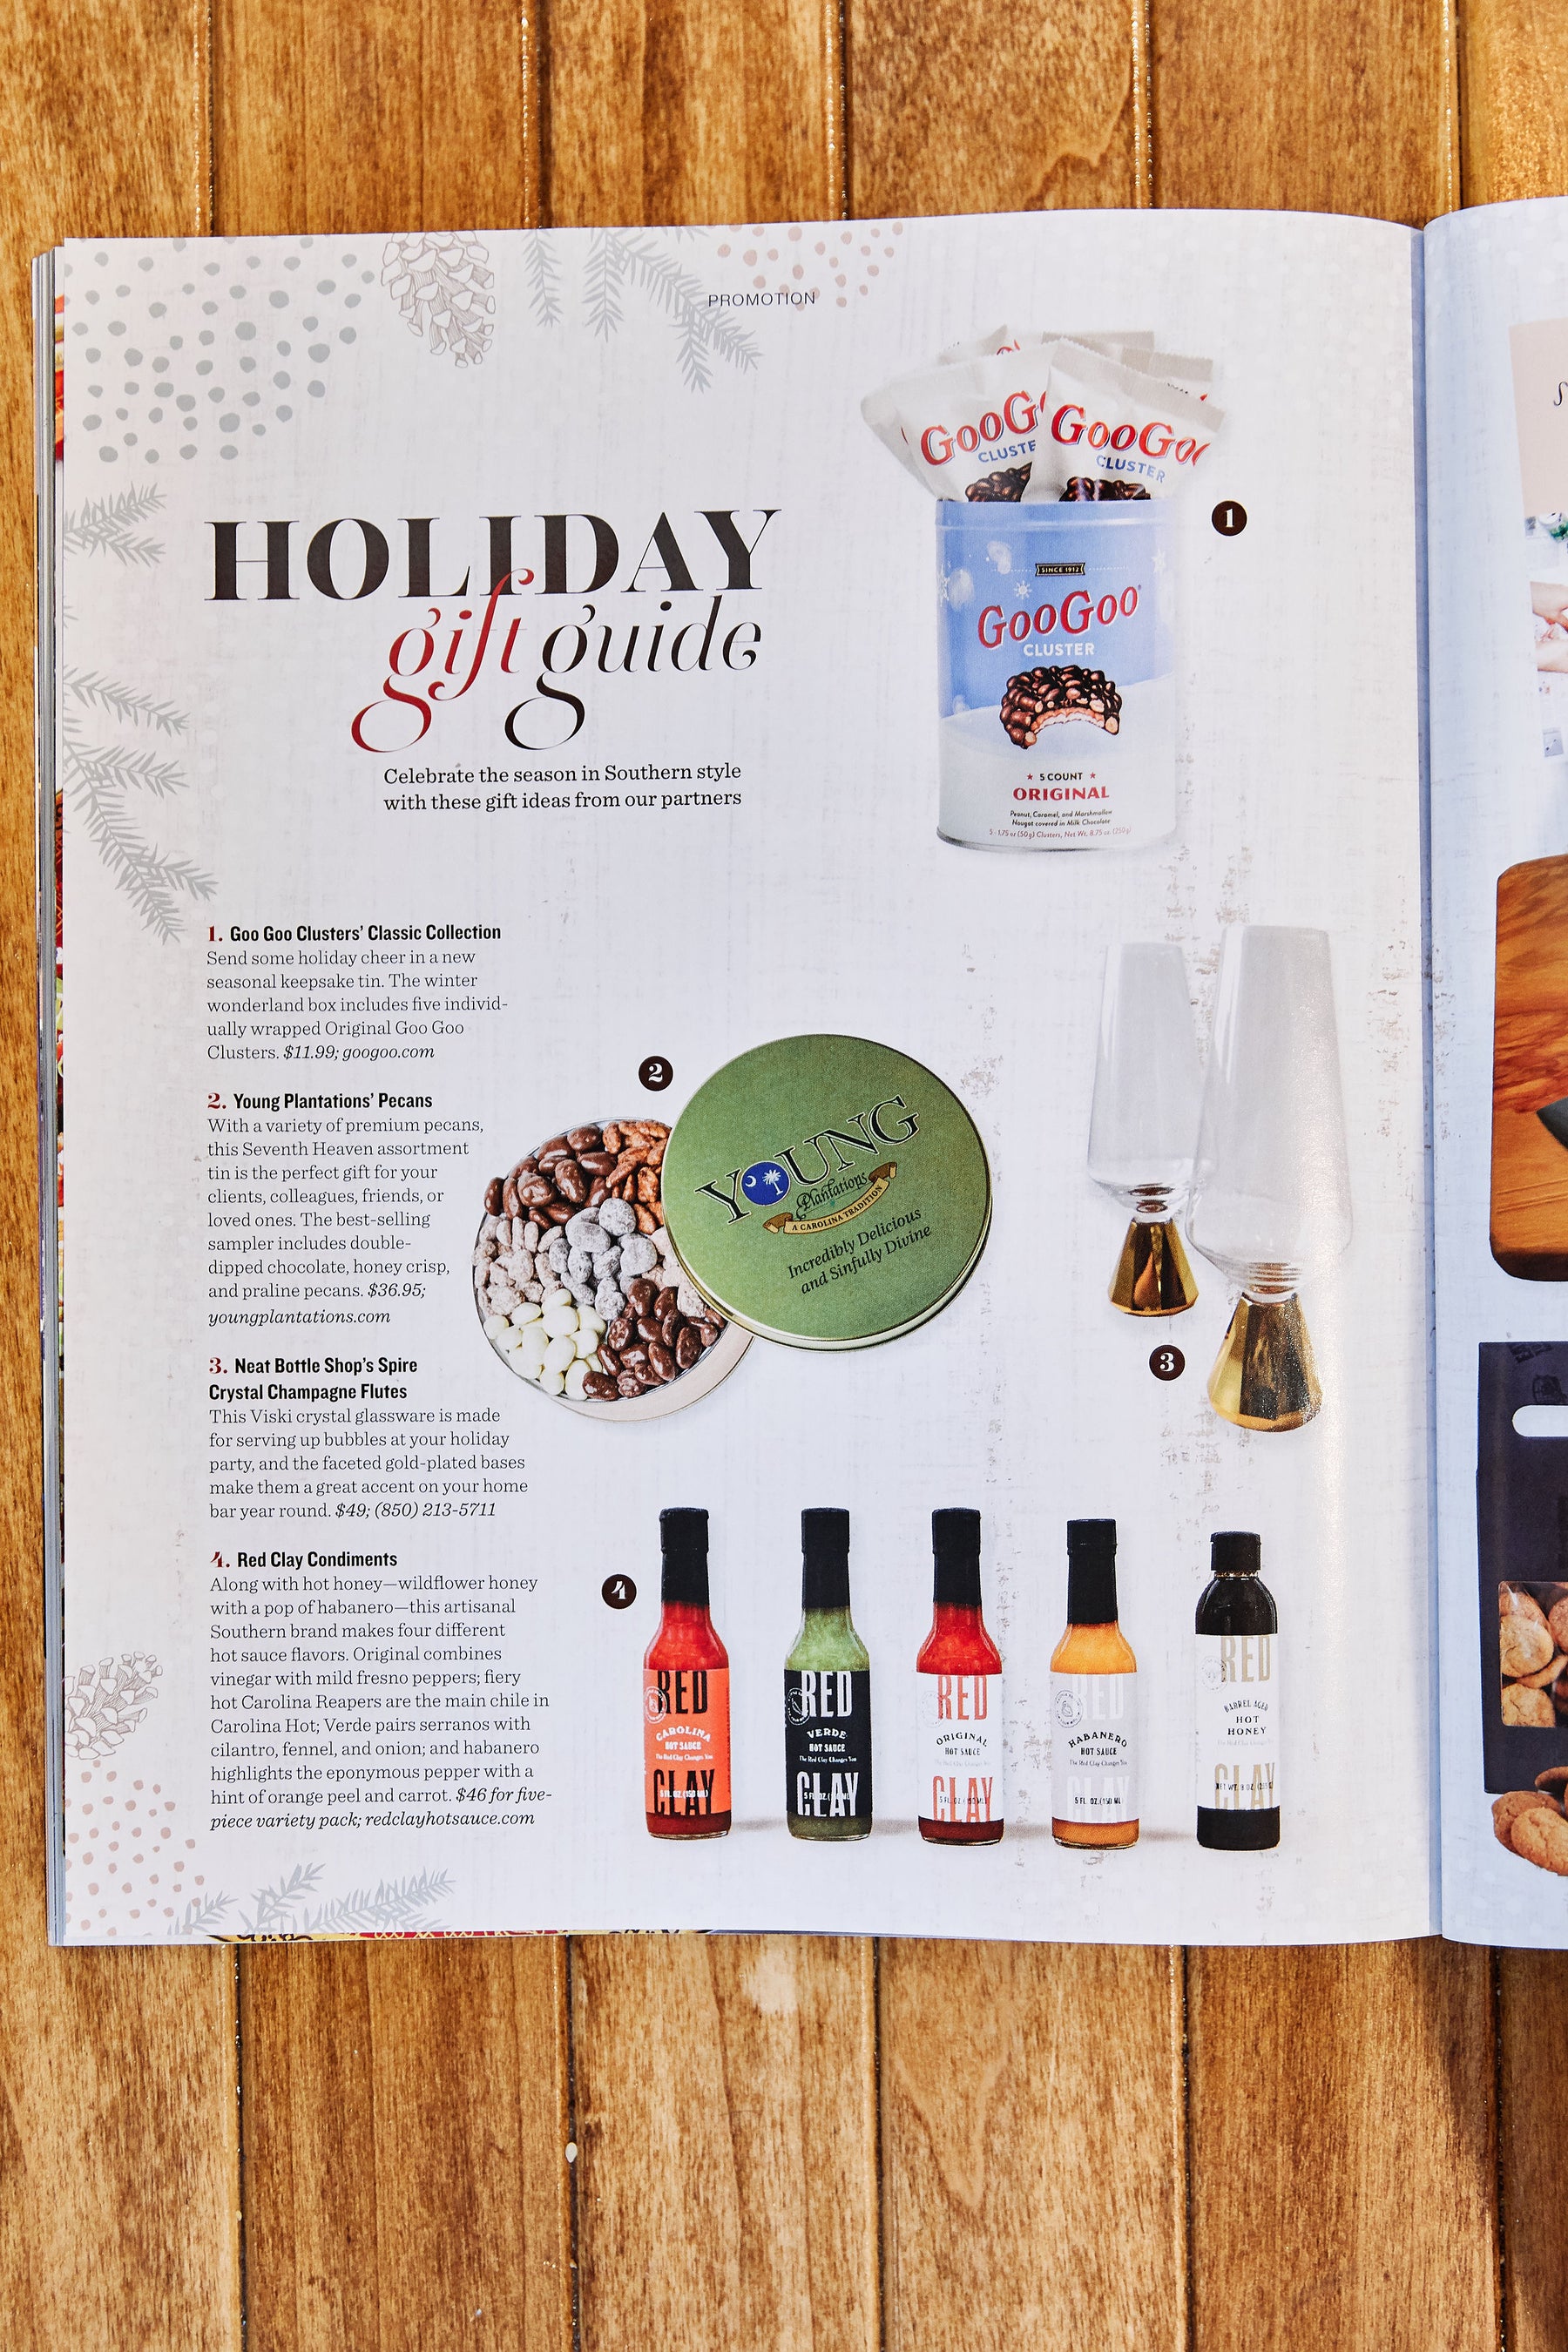 The Local Palate includes Red Clay in Holiday Gift Guide